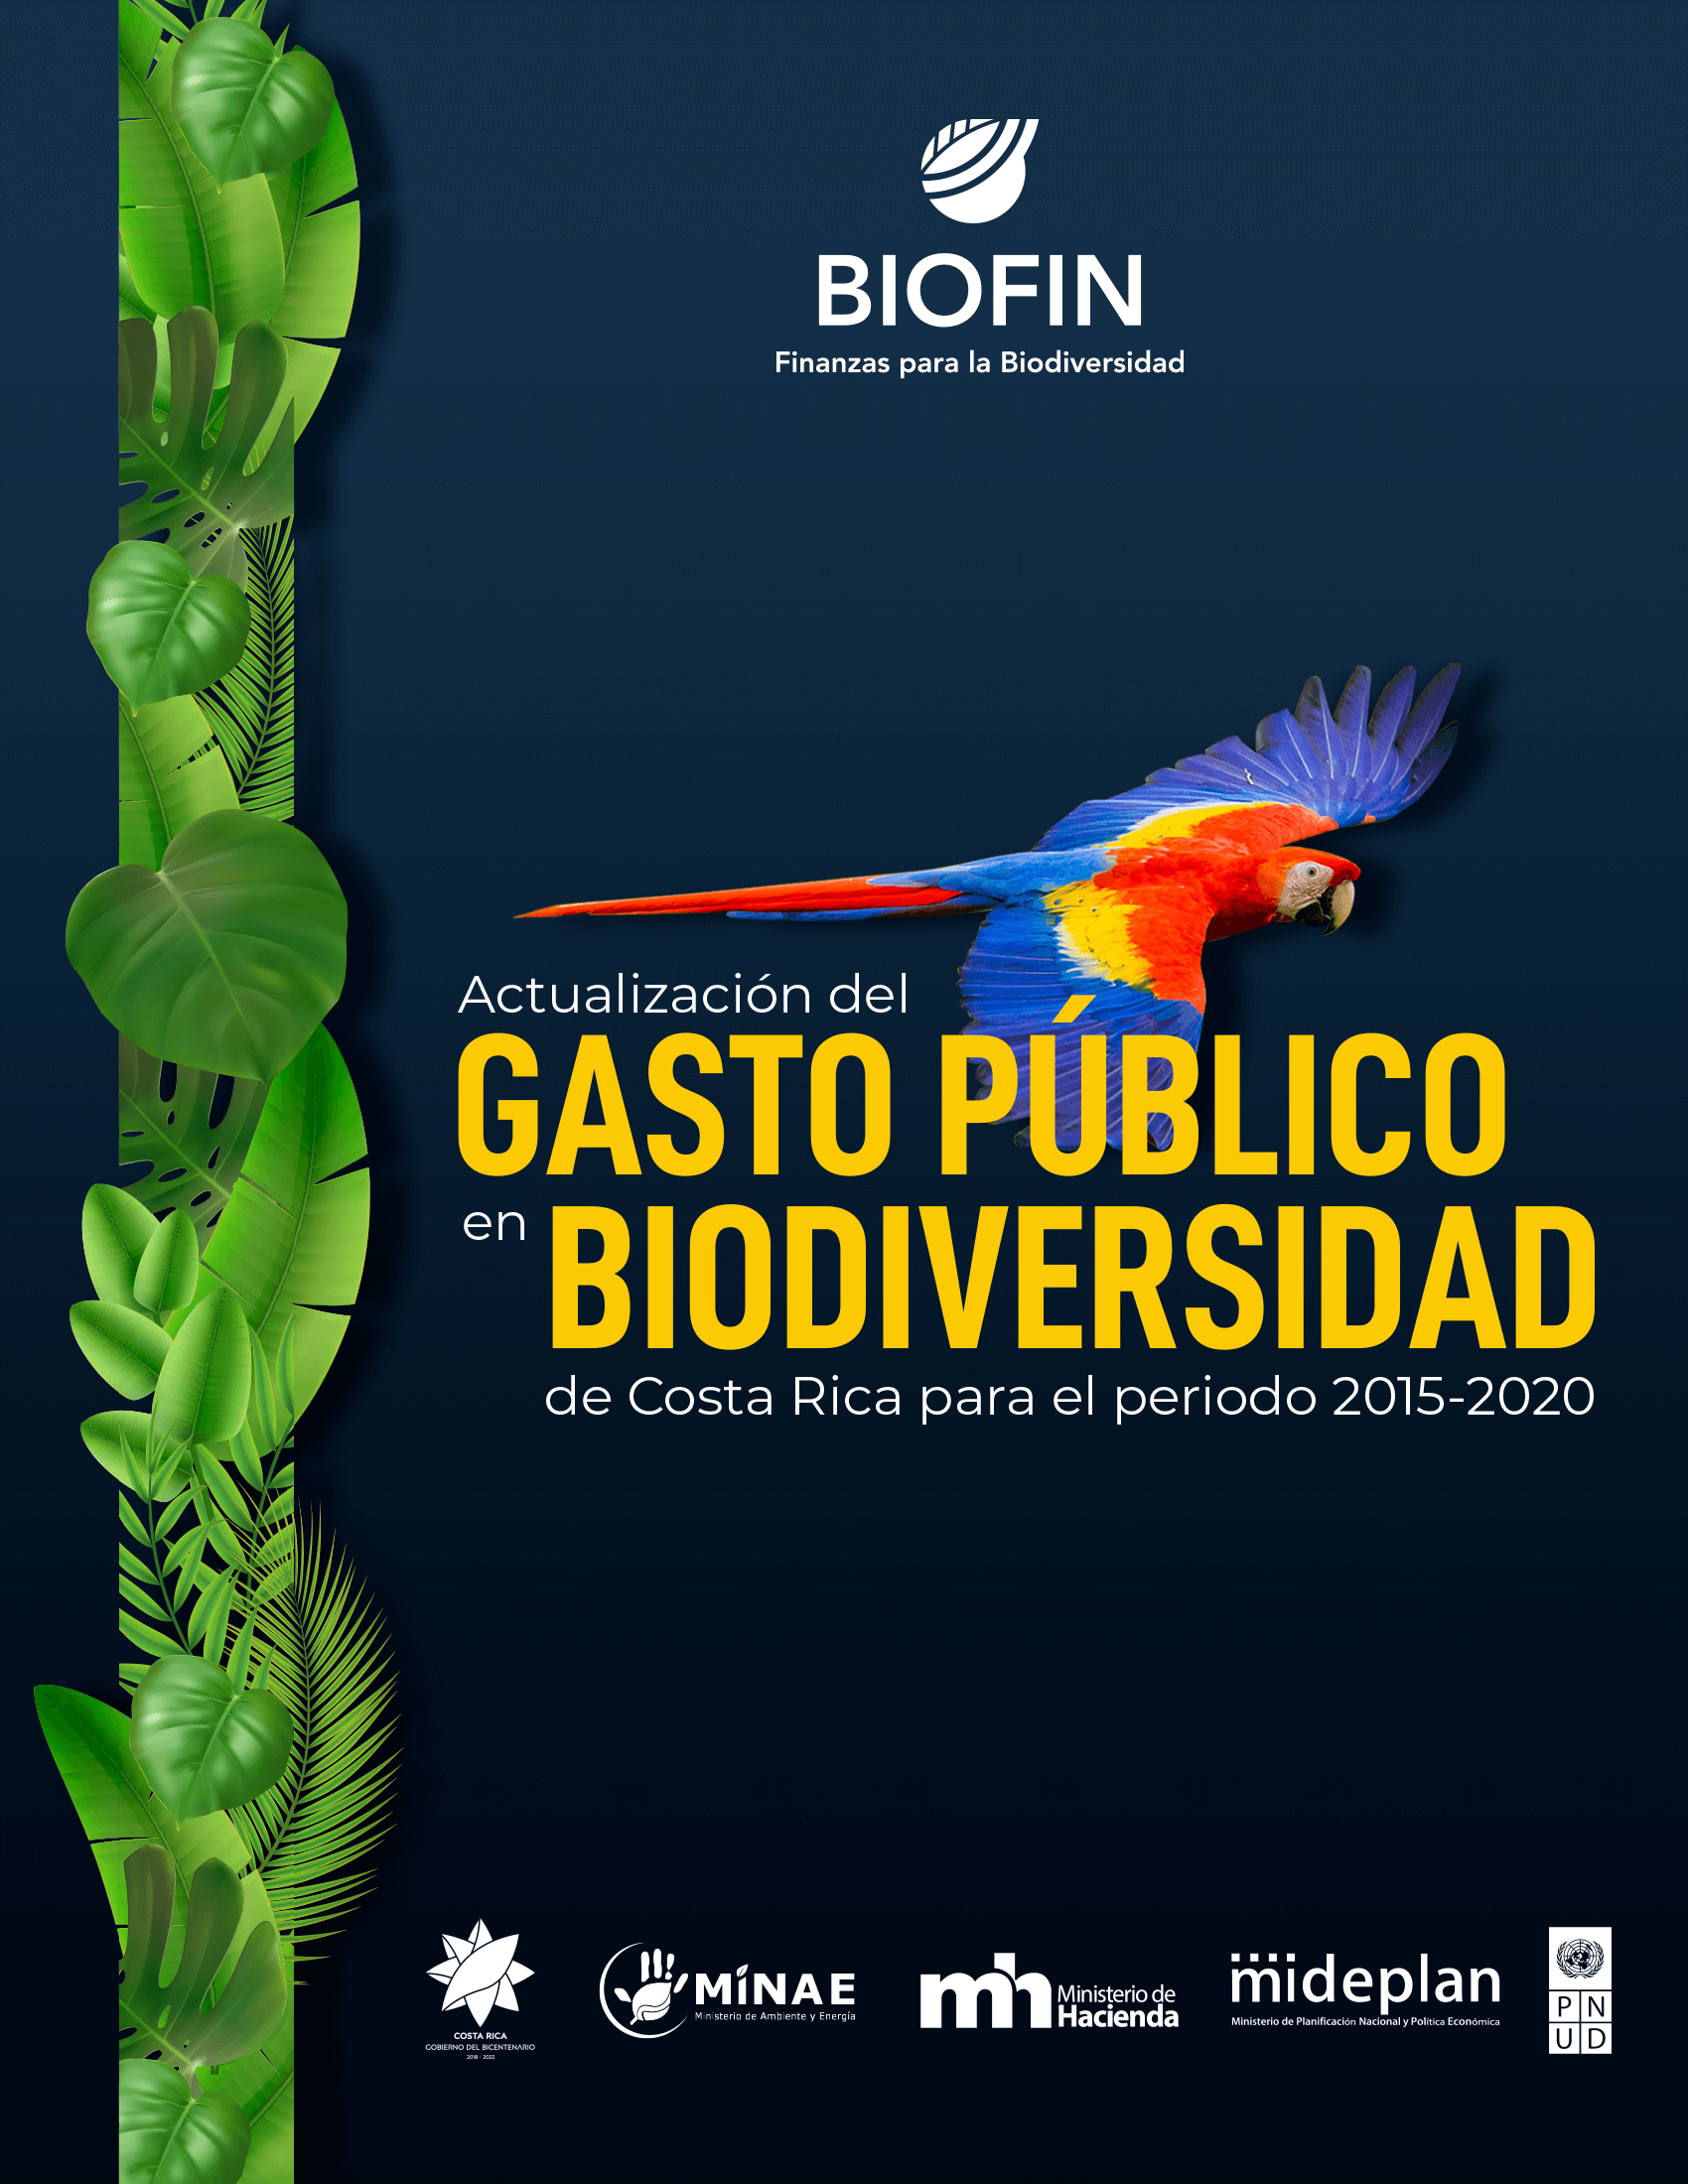 UPDATE OF PUBLIC EXPENDITURE ON BIODIVERSITY OF COSTA RICA FOR THE PERIOD 2015 – 2020